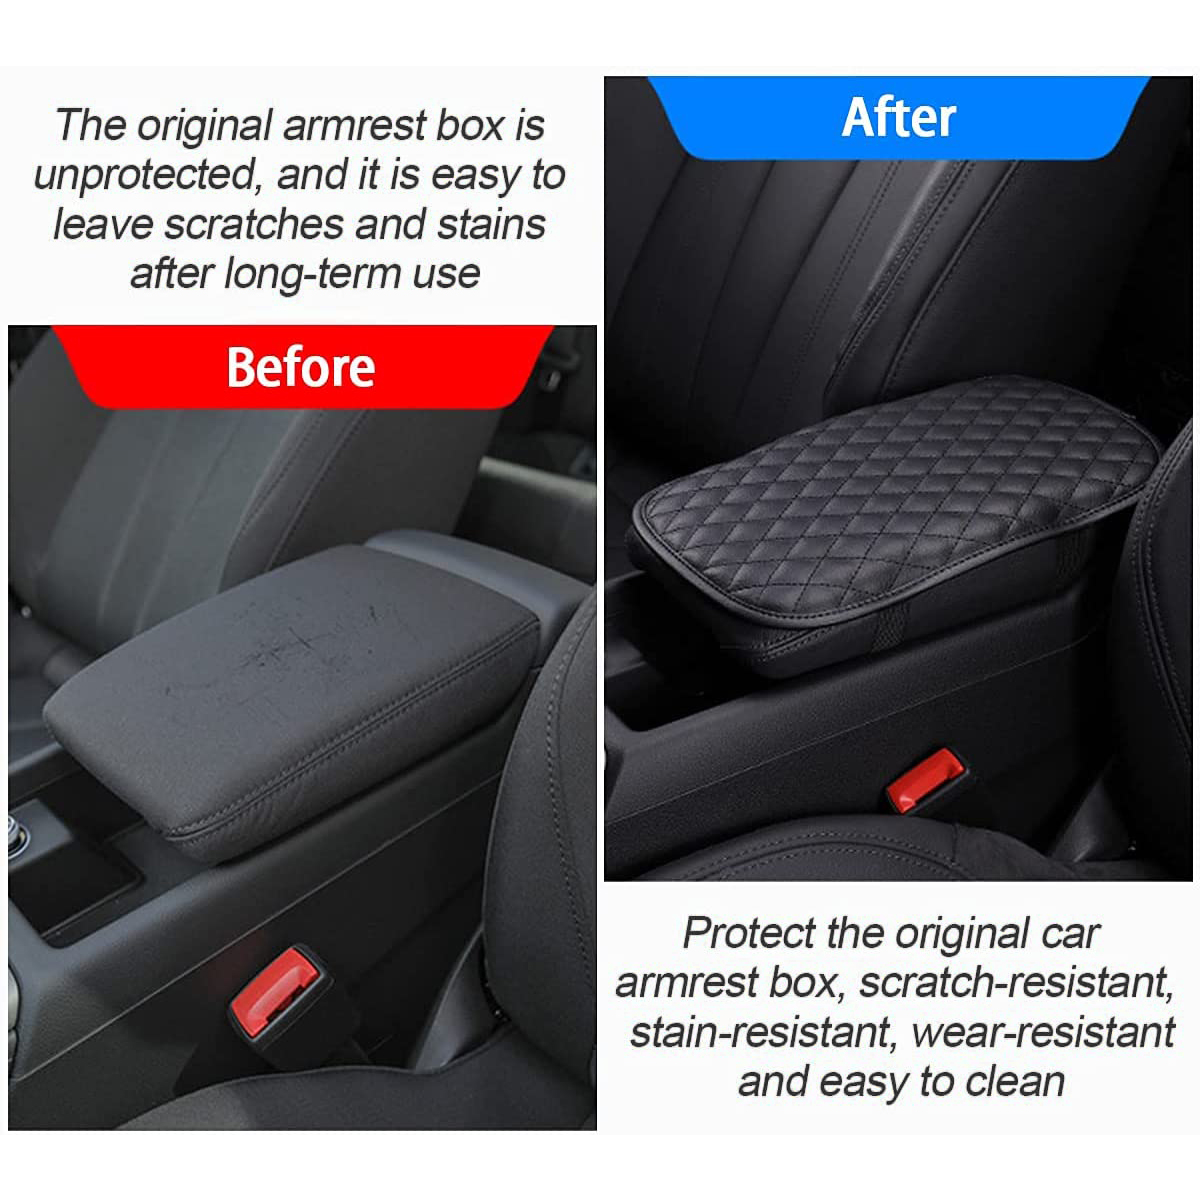 Car Armrest Cover - Universal Waterproof Car Center Console Cover, Car Armrest Seat Box Cover Protector (11.8 x 7.87 Inch) - image 4 of 8